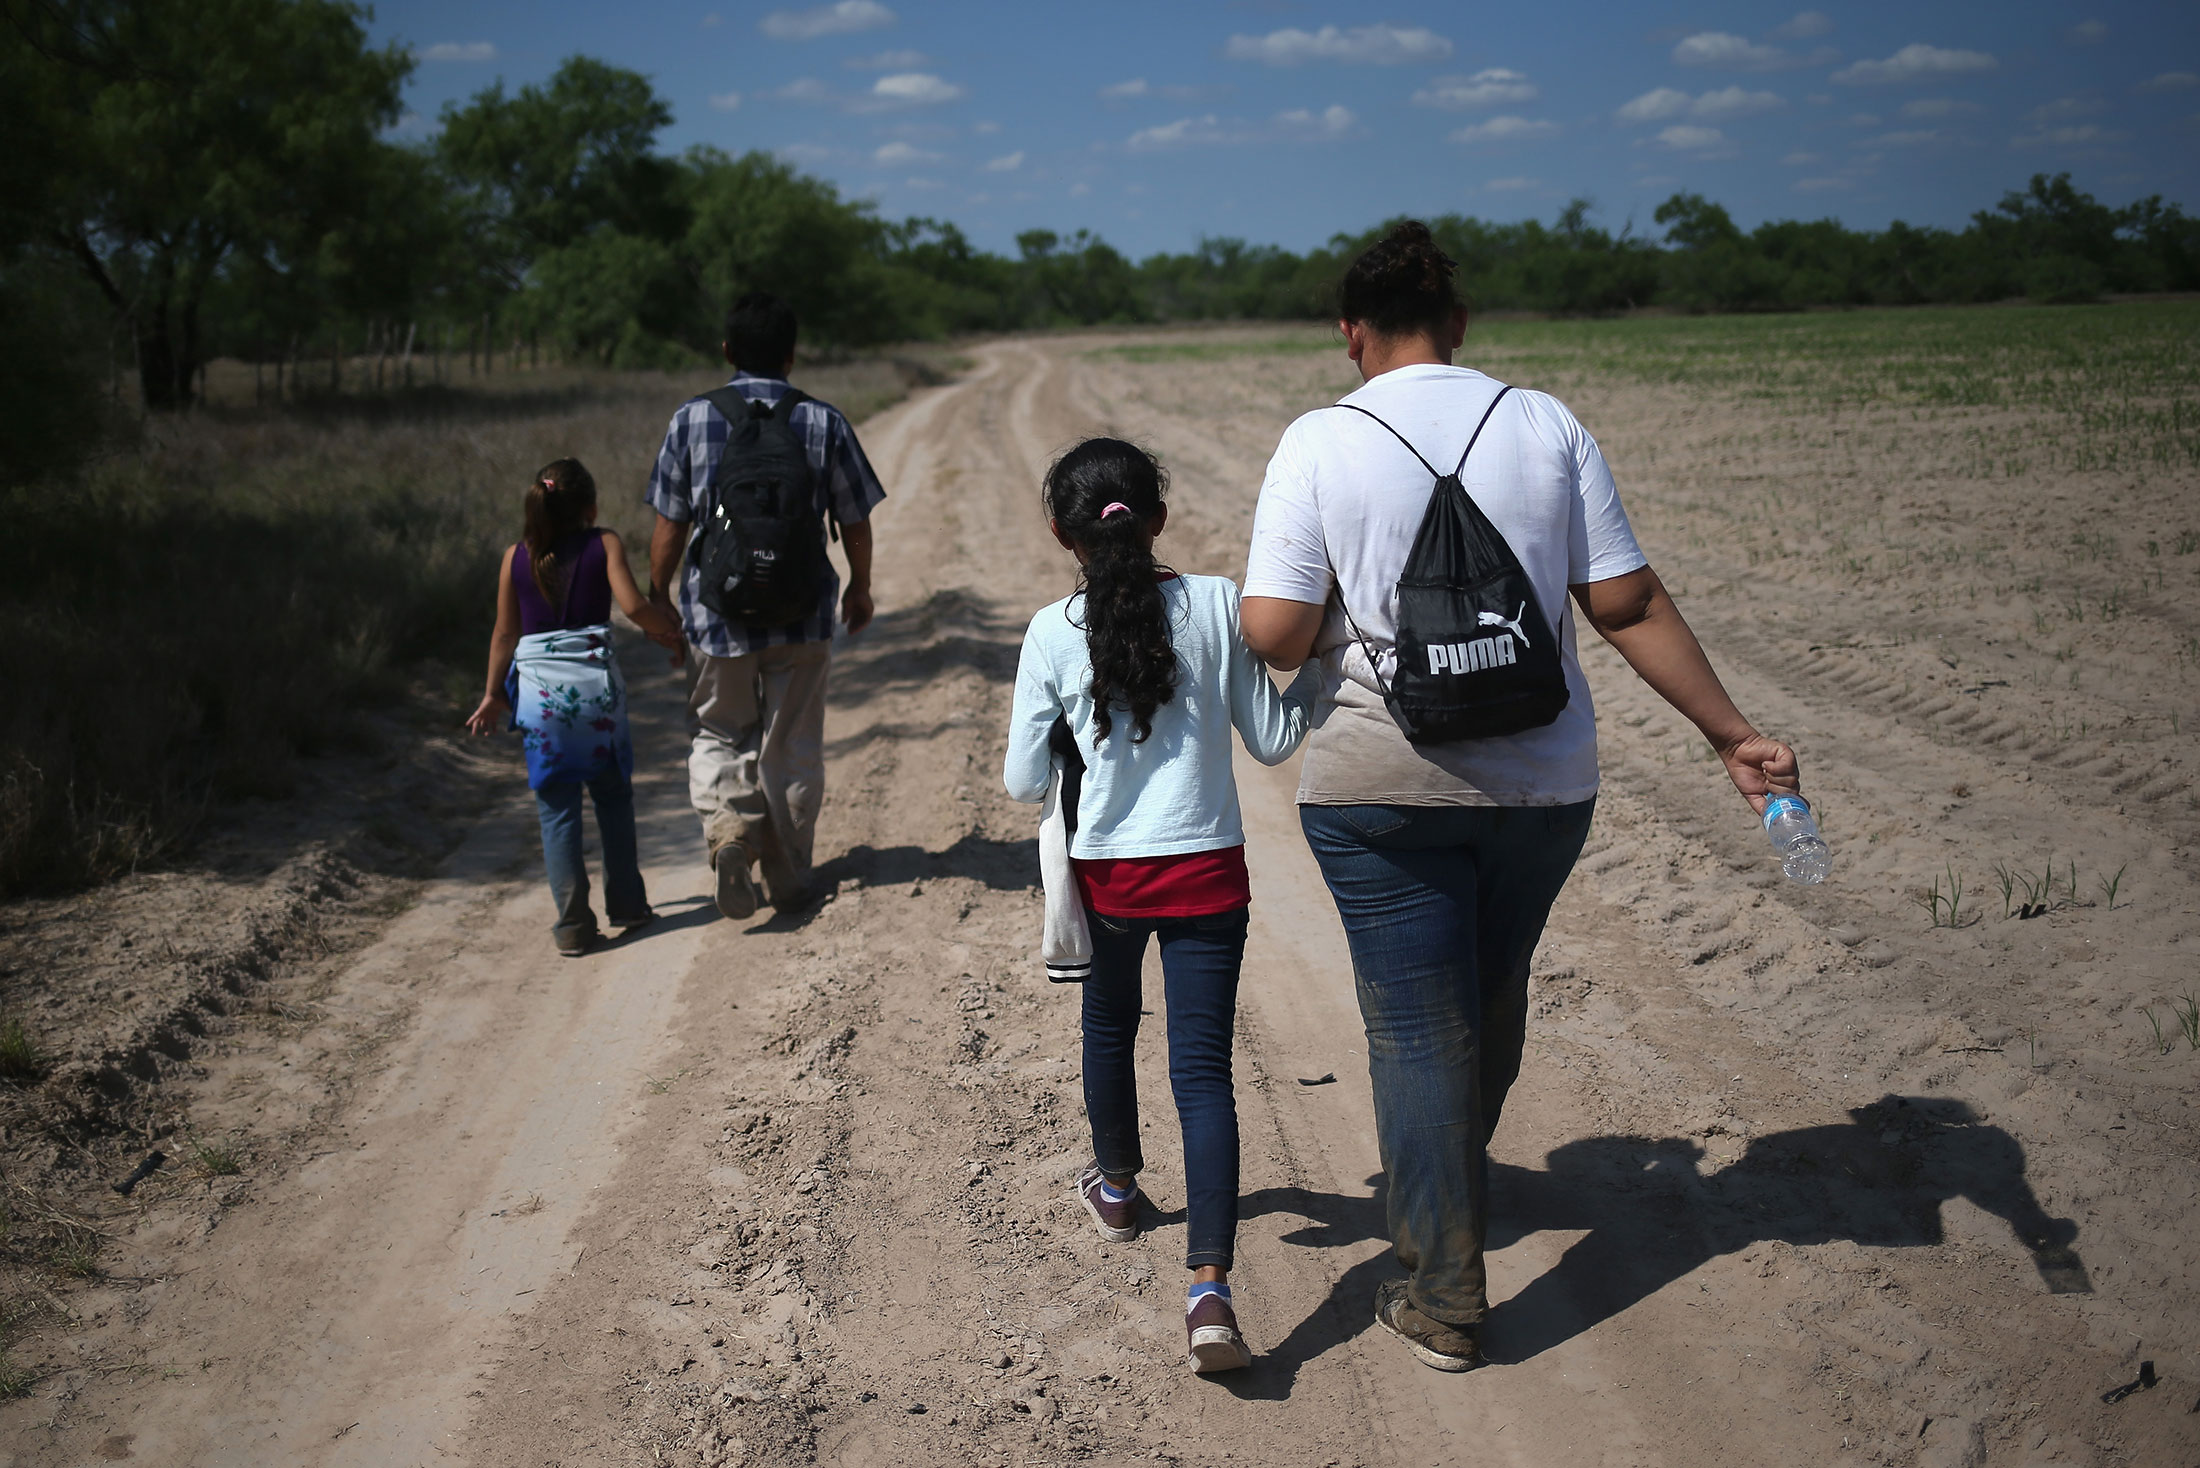 ROMA, TX - APRIL 14:  Central American immigrant families walk through the countryside after crossing from Mexico into the United States to seek asylum on April 14, 2016 in Roma, Texas. Border security and immigration, both legal and otherwise, continue to be contentious national issues in the 2016 Presidential campaign.  (Photo by John Moore/Getty Images)